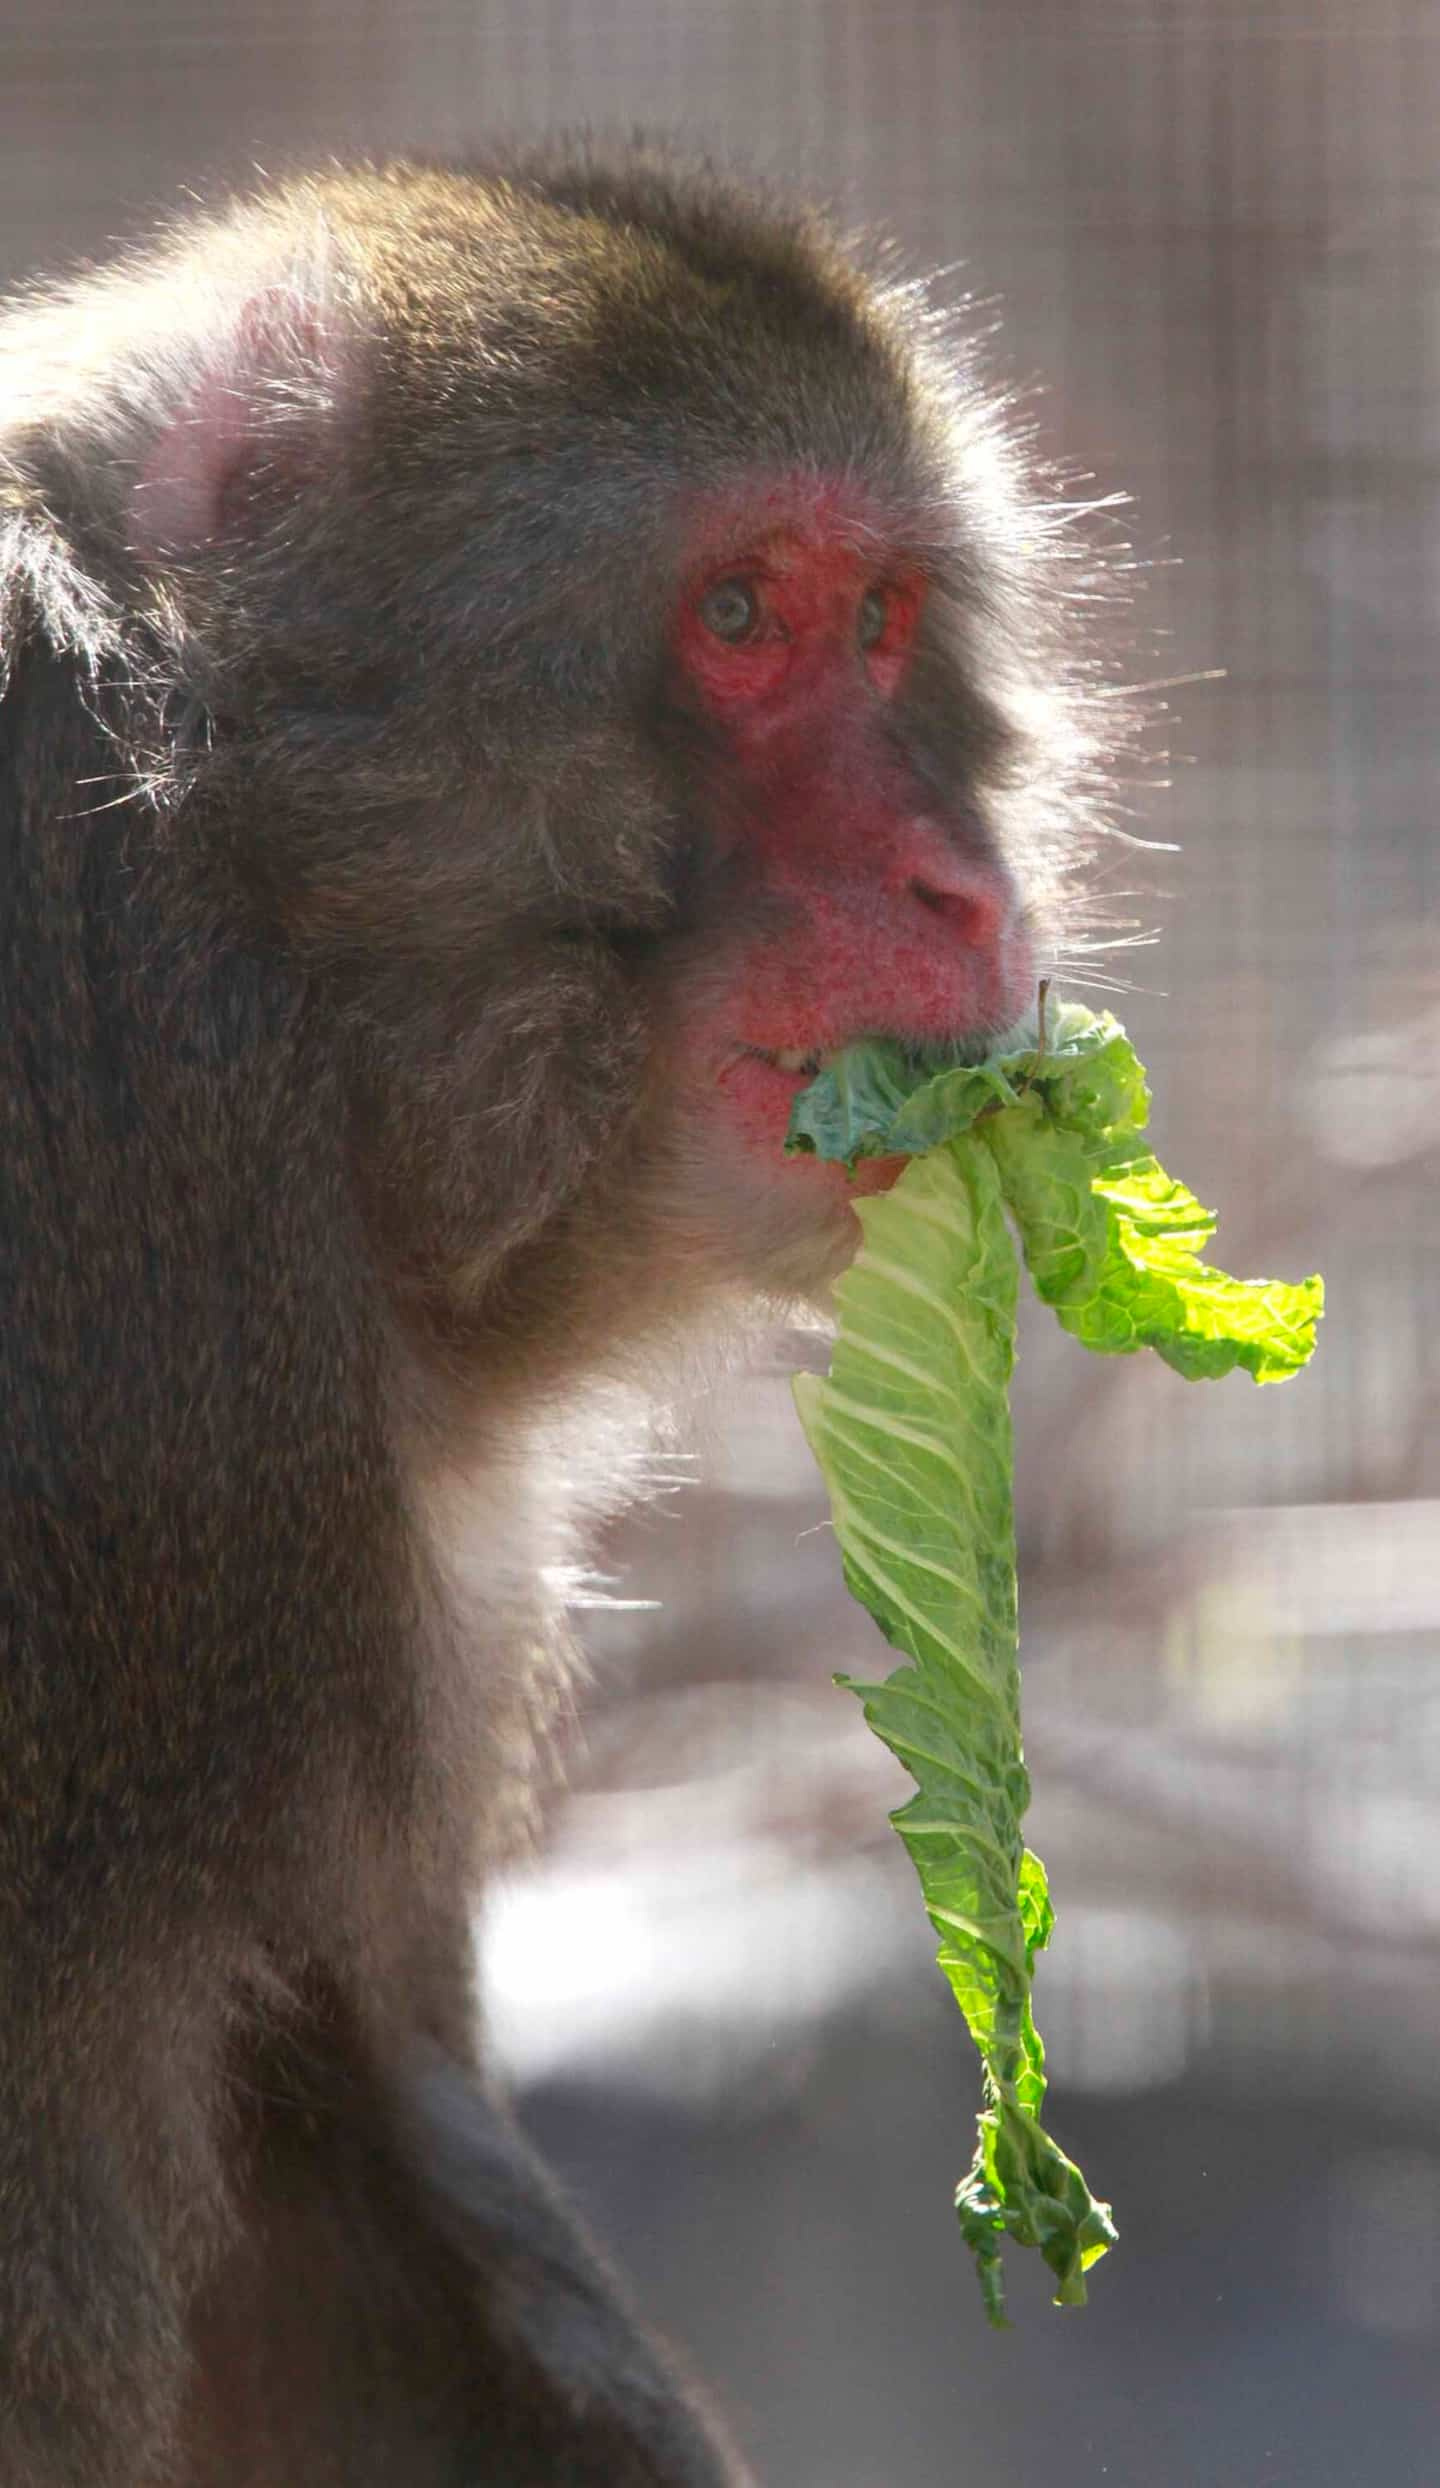 Serial macaque attacks in Japan: one of the monkeys captured and killed